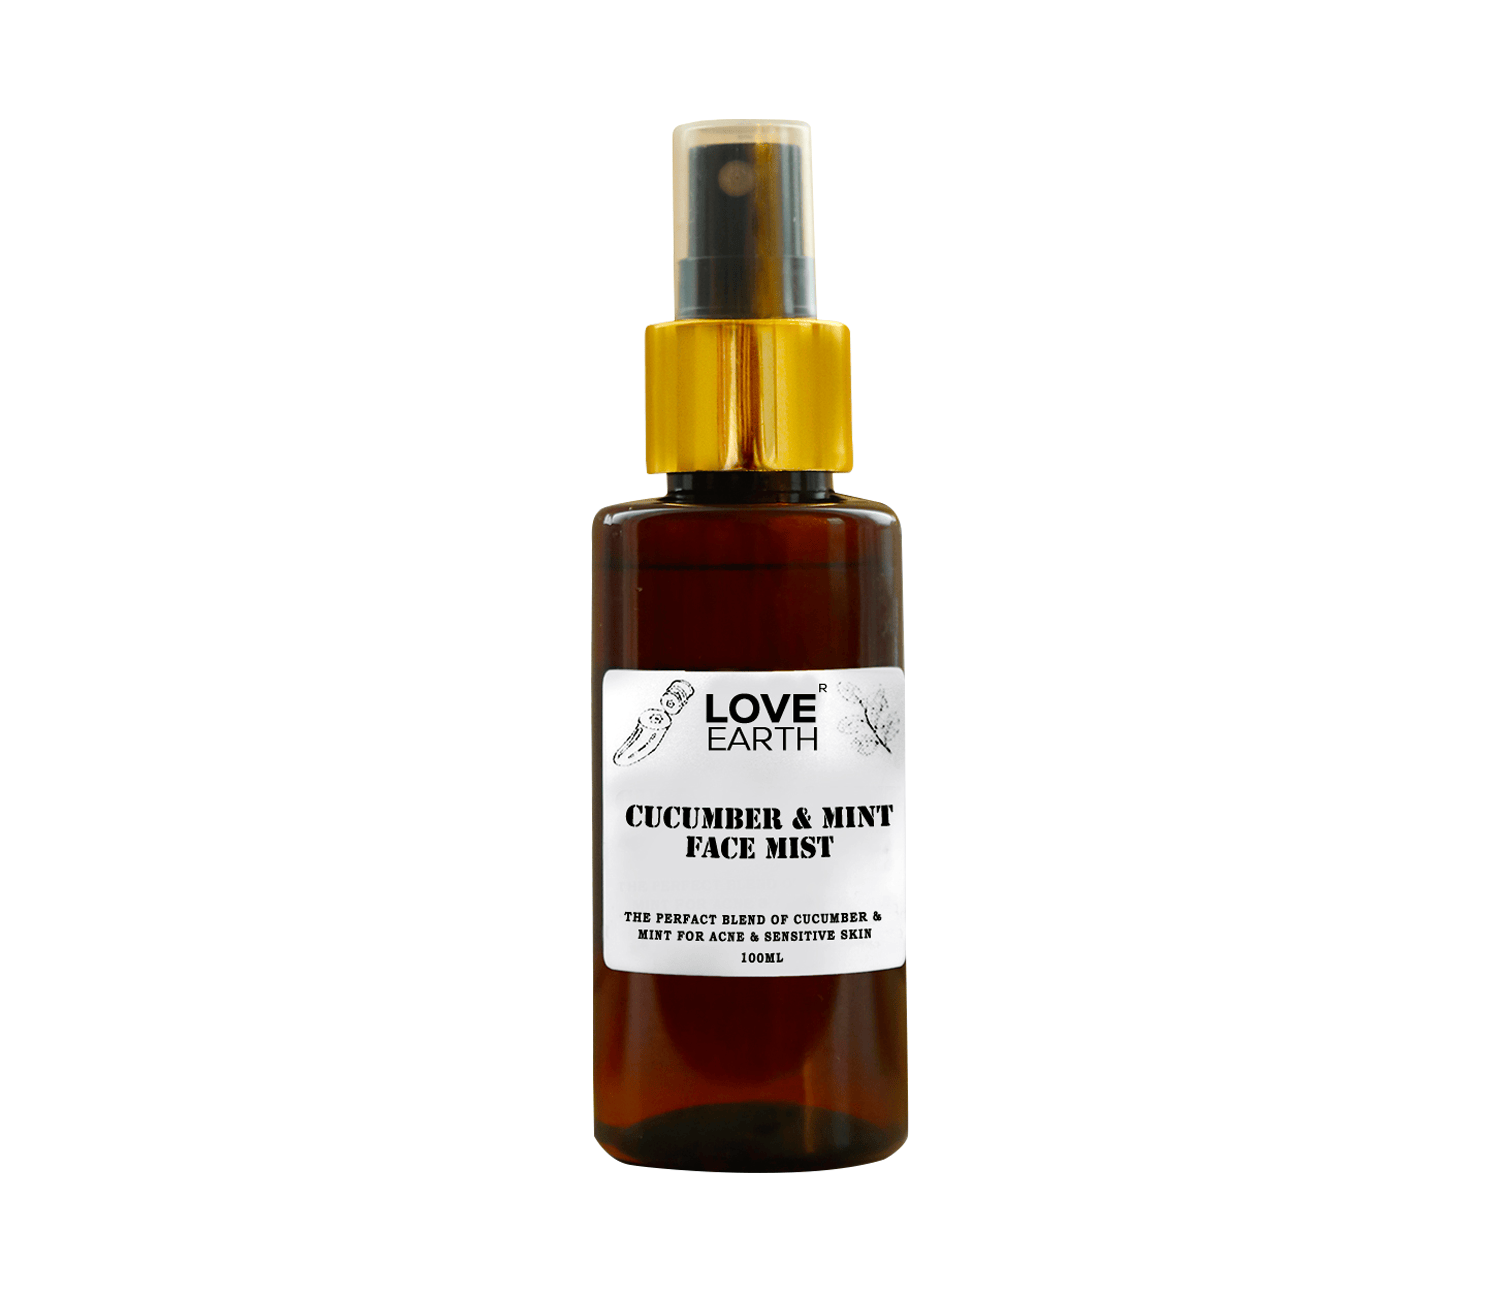 LOVE EARTH | Love Earth Cucumber Mint Face Mist Toner with Cucumber Mint for Acne Defense and Sensitive Skin 100ml